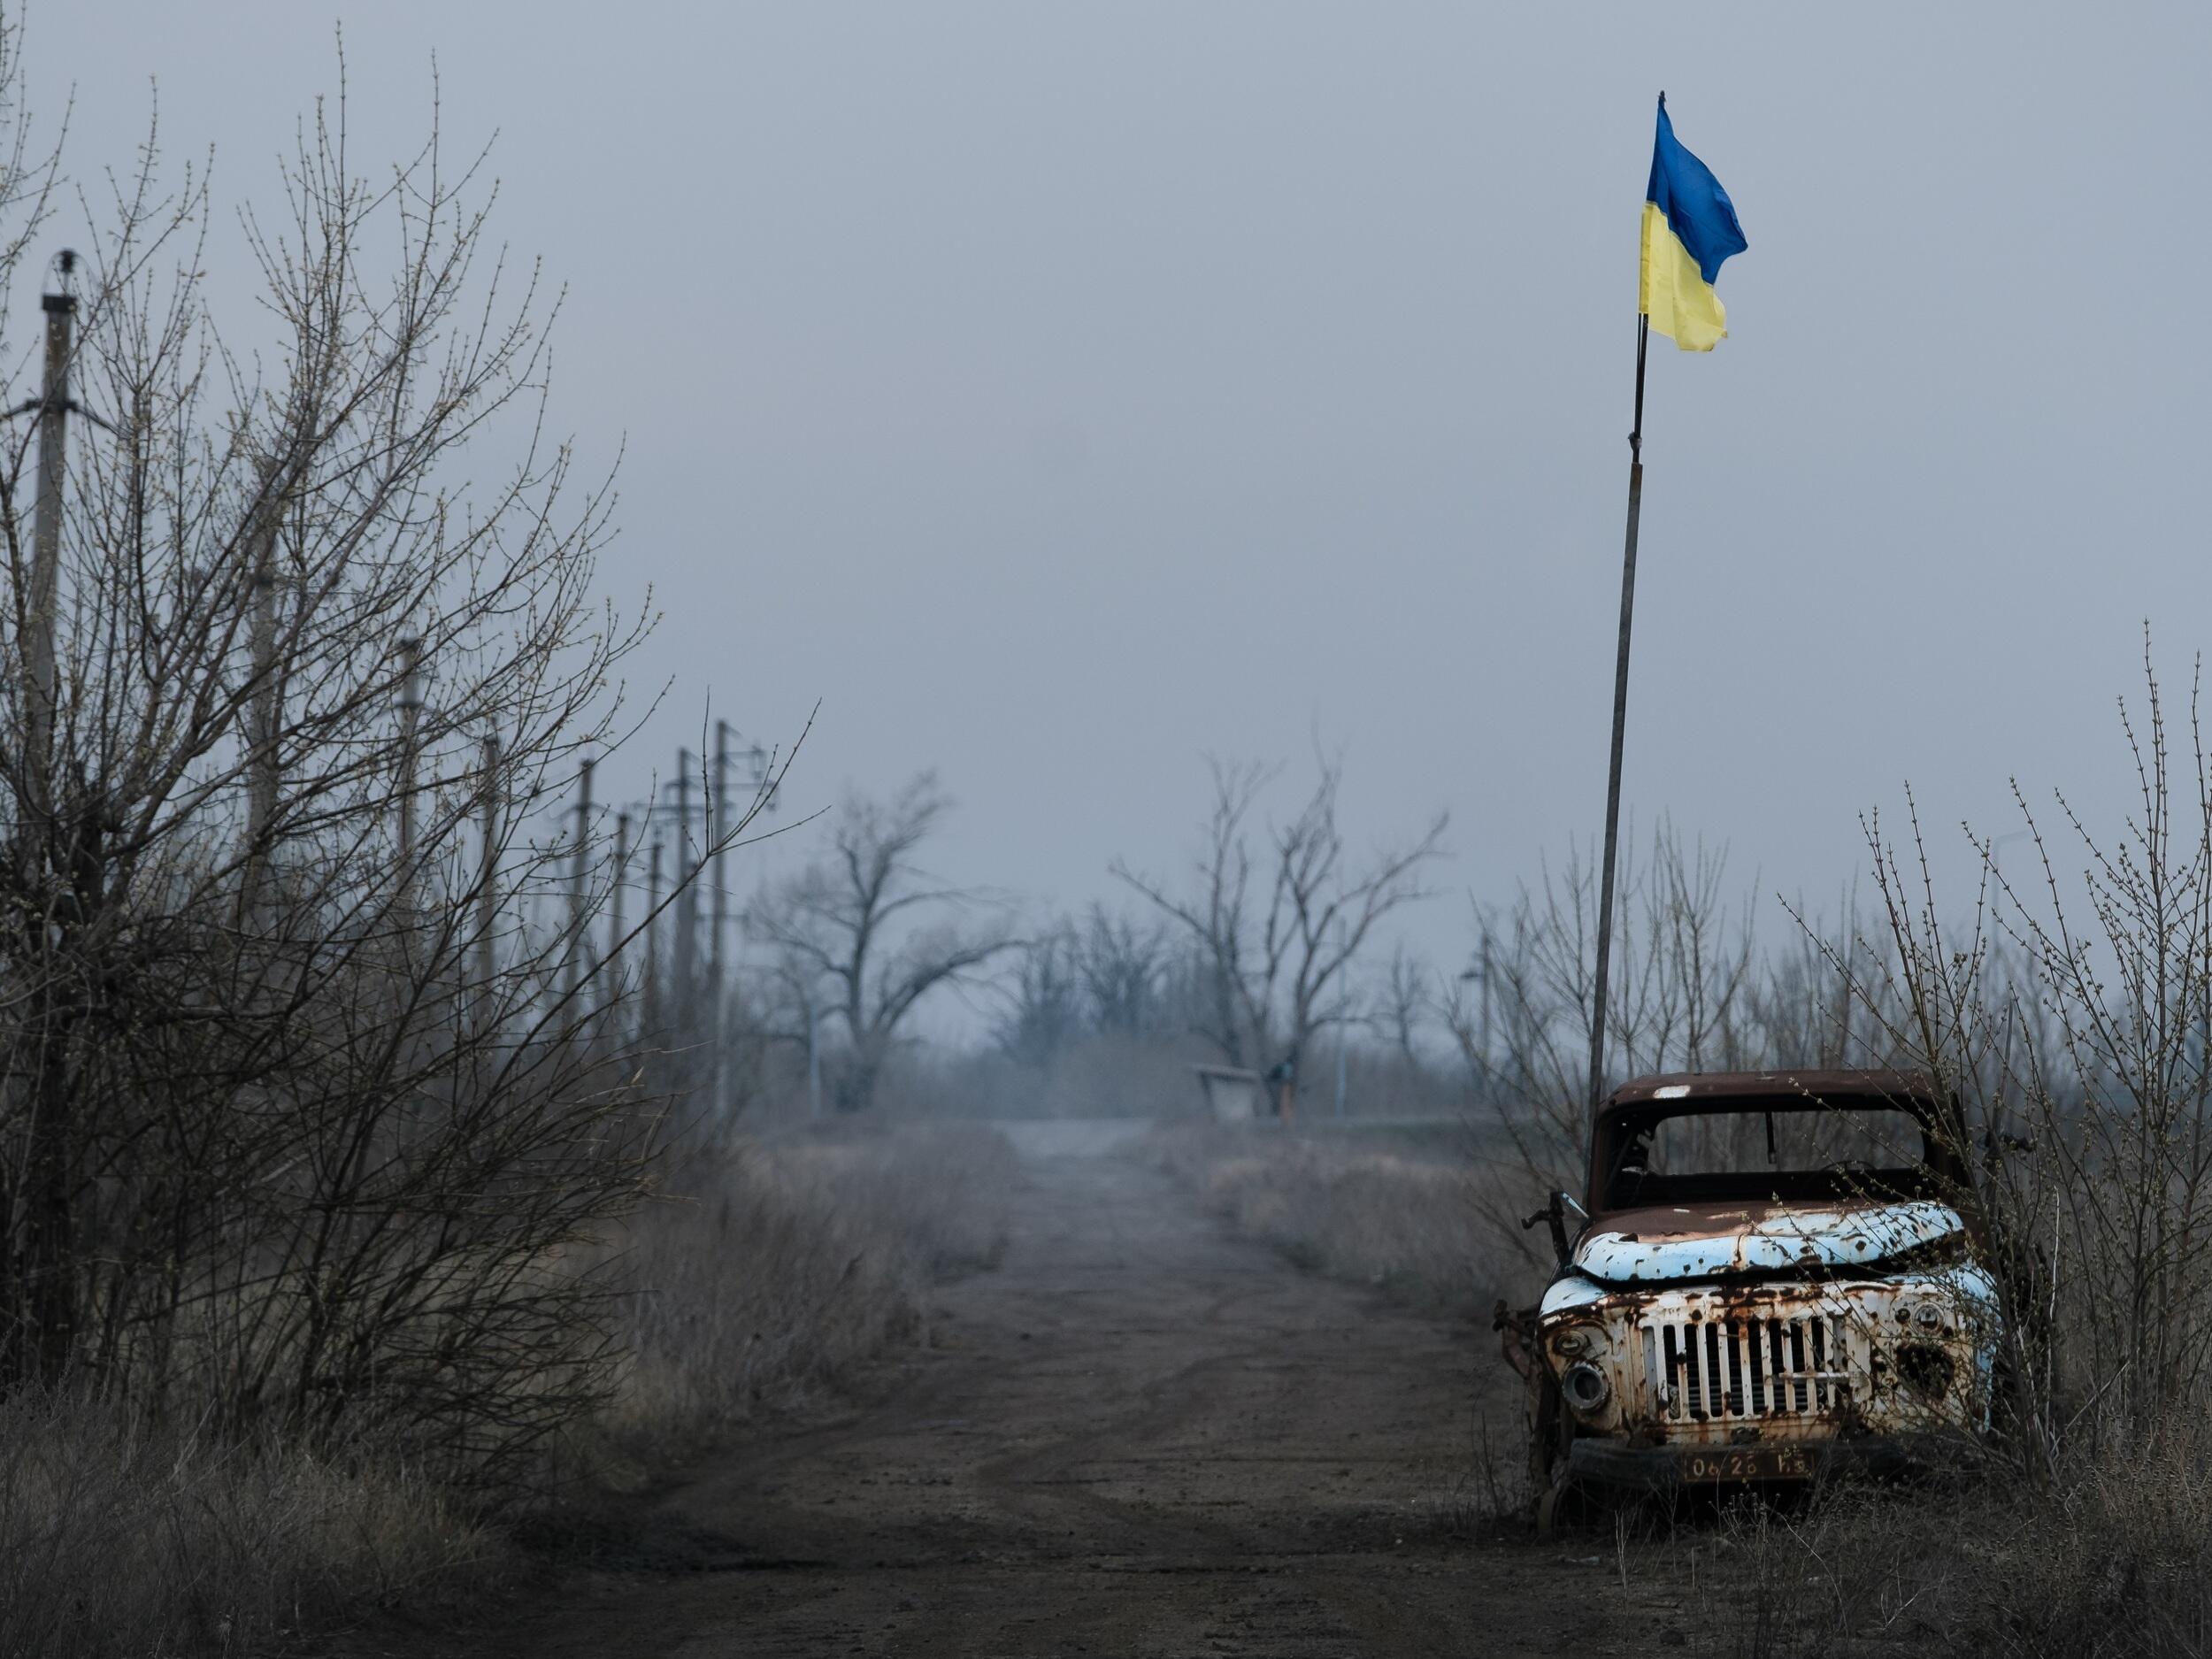 A ukrainian flag on a flag pole next to an abandoned jeep in an area with dead trees and a gray sky 